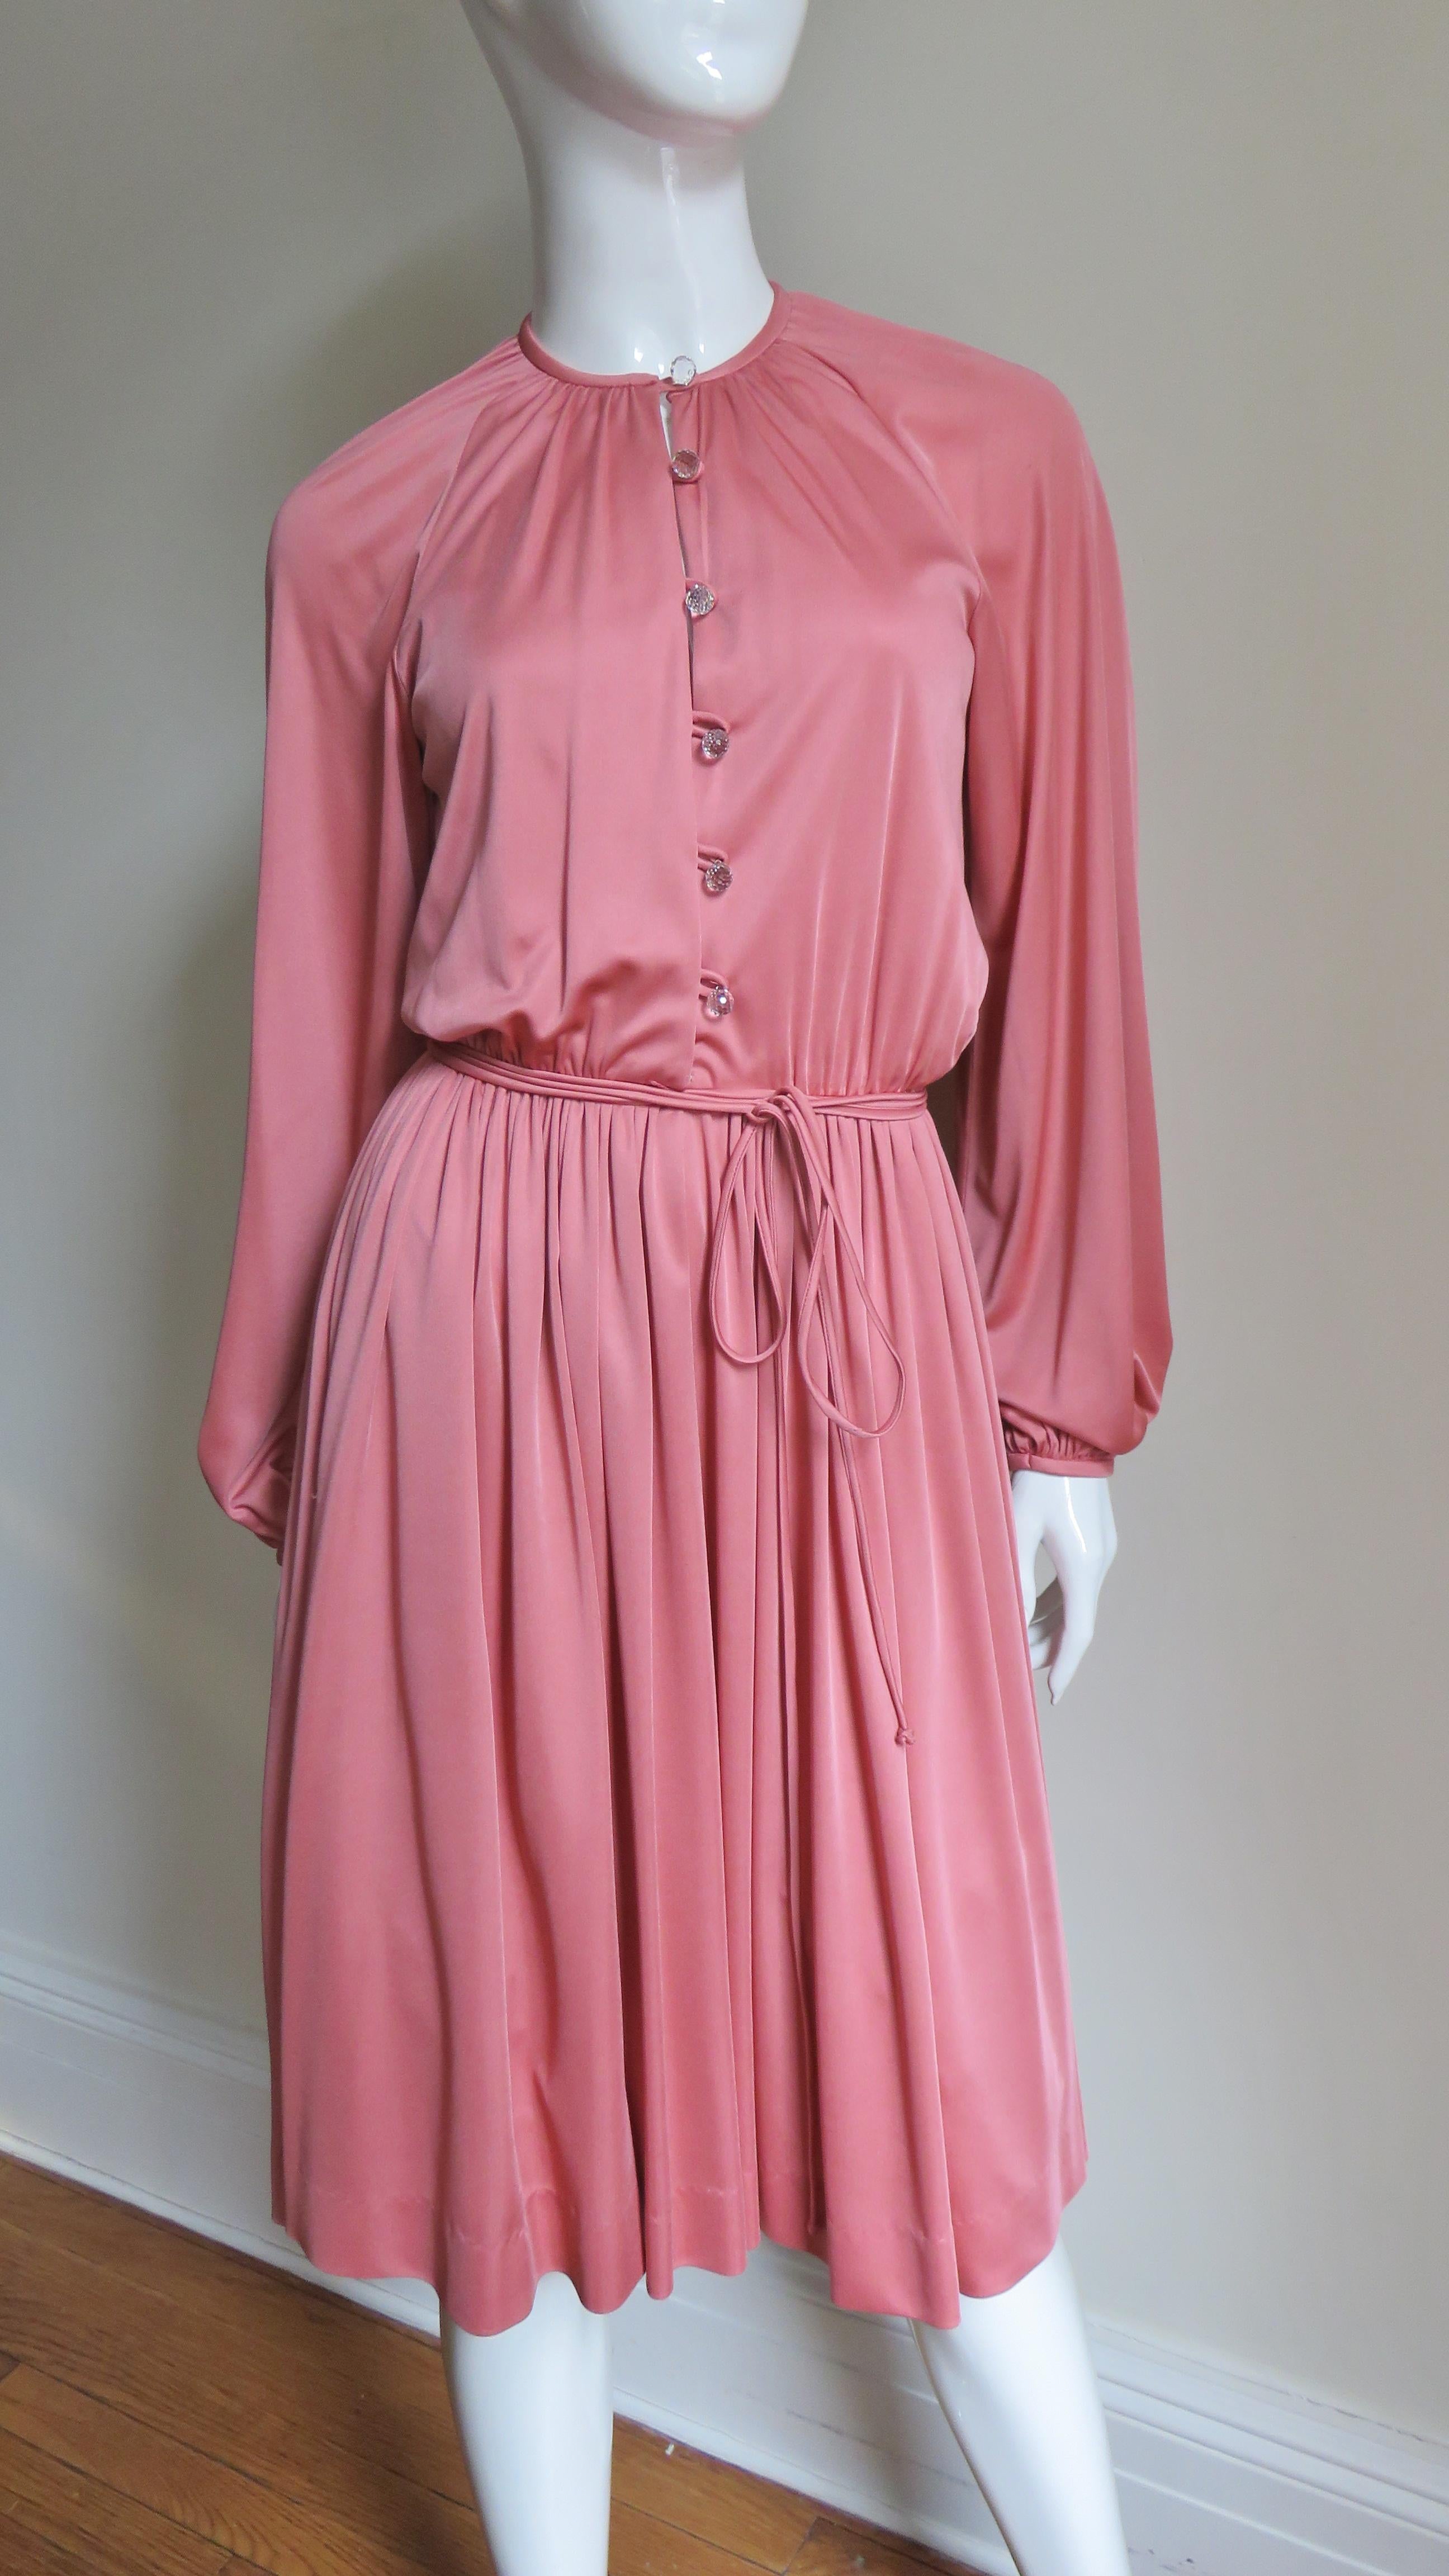 A pretty pink jersey dress by Donald Brooks. It has crew neckline and raglan balloon sleeves.  The bodice has beautiful round faceted cut crystal buttons and loops up the front.  The skirt gathers onto the bodice which has a small piped tie belt at